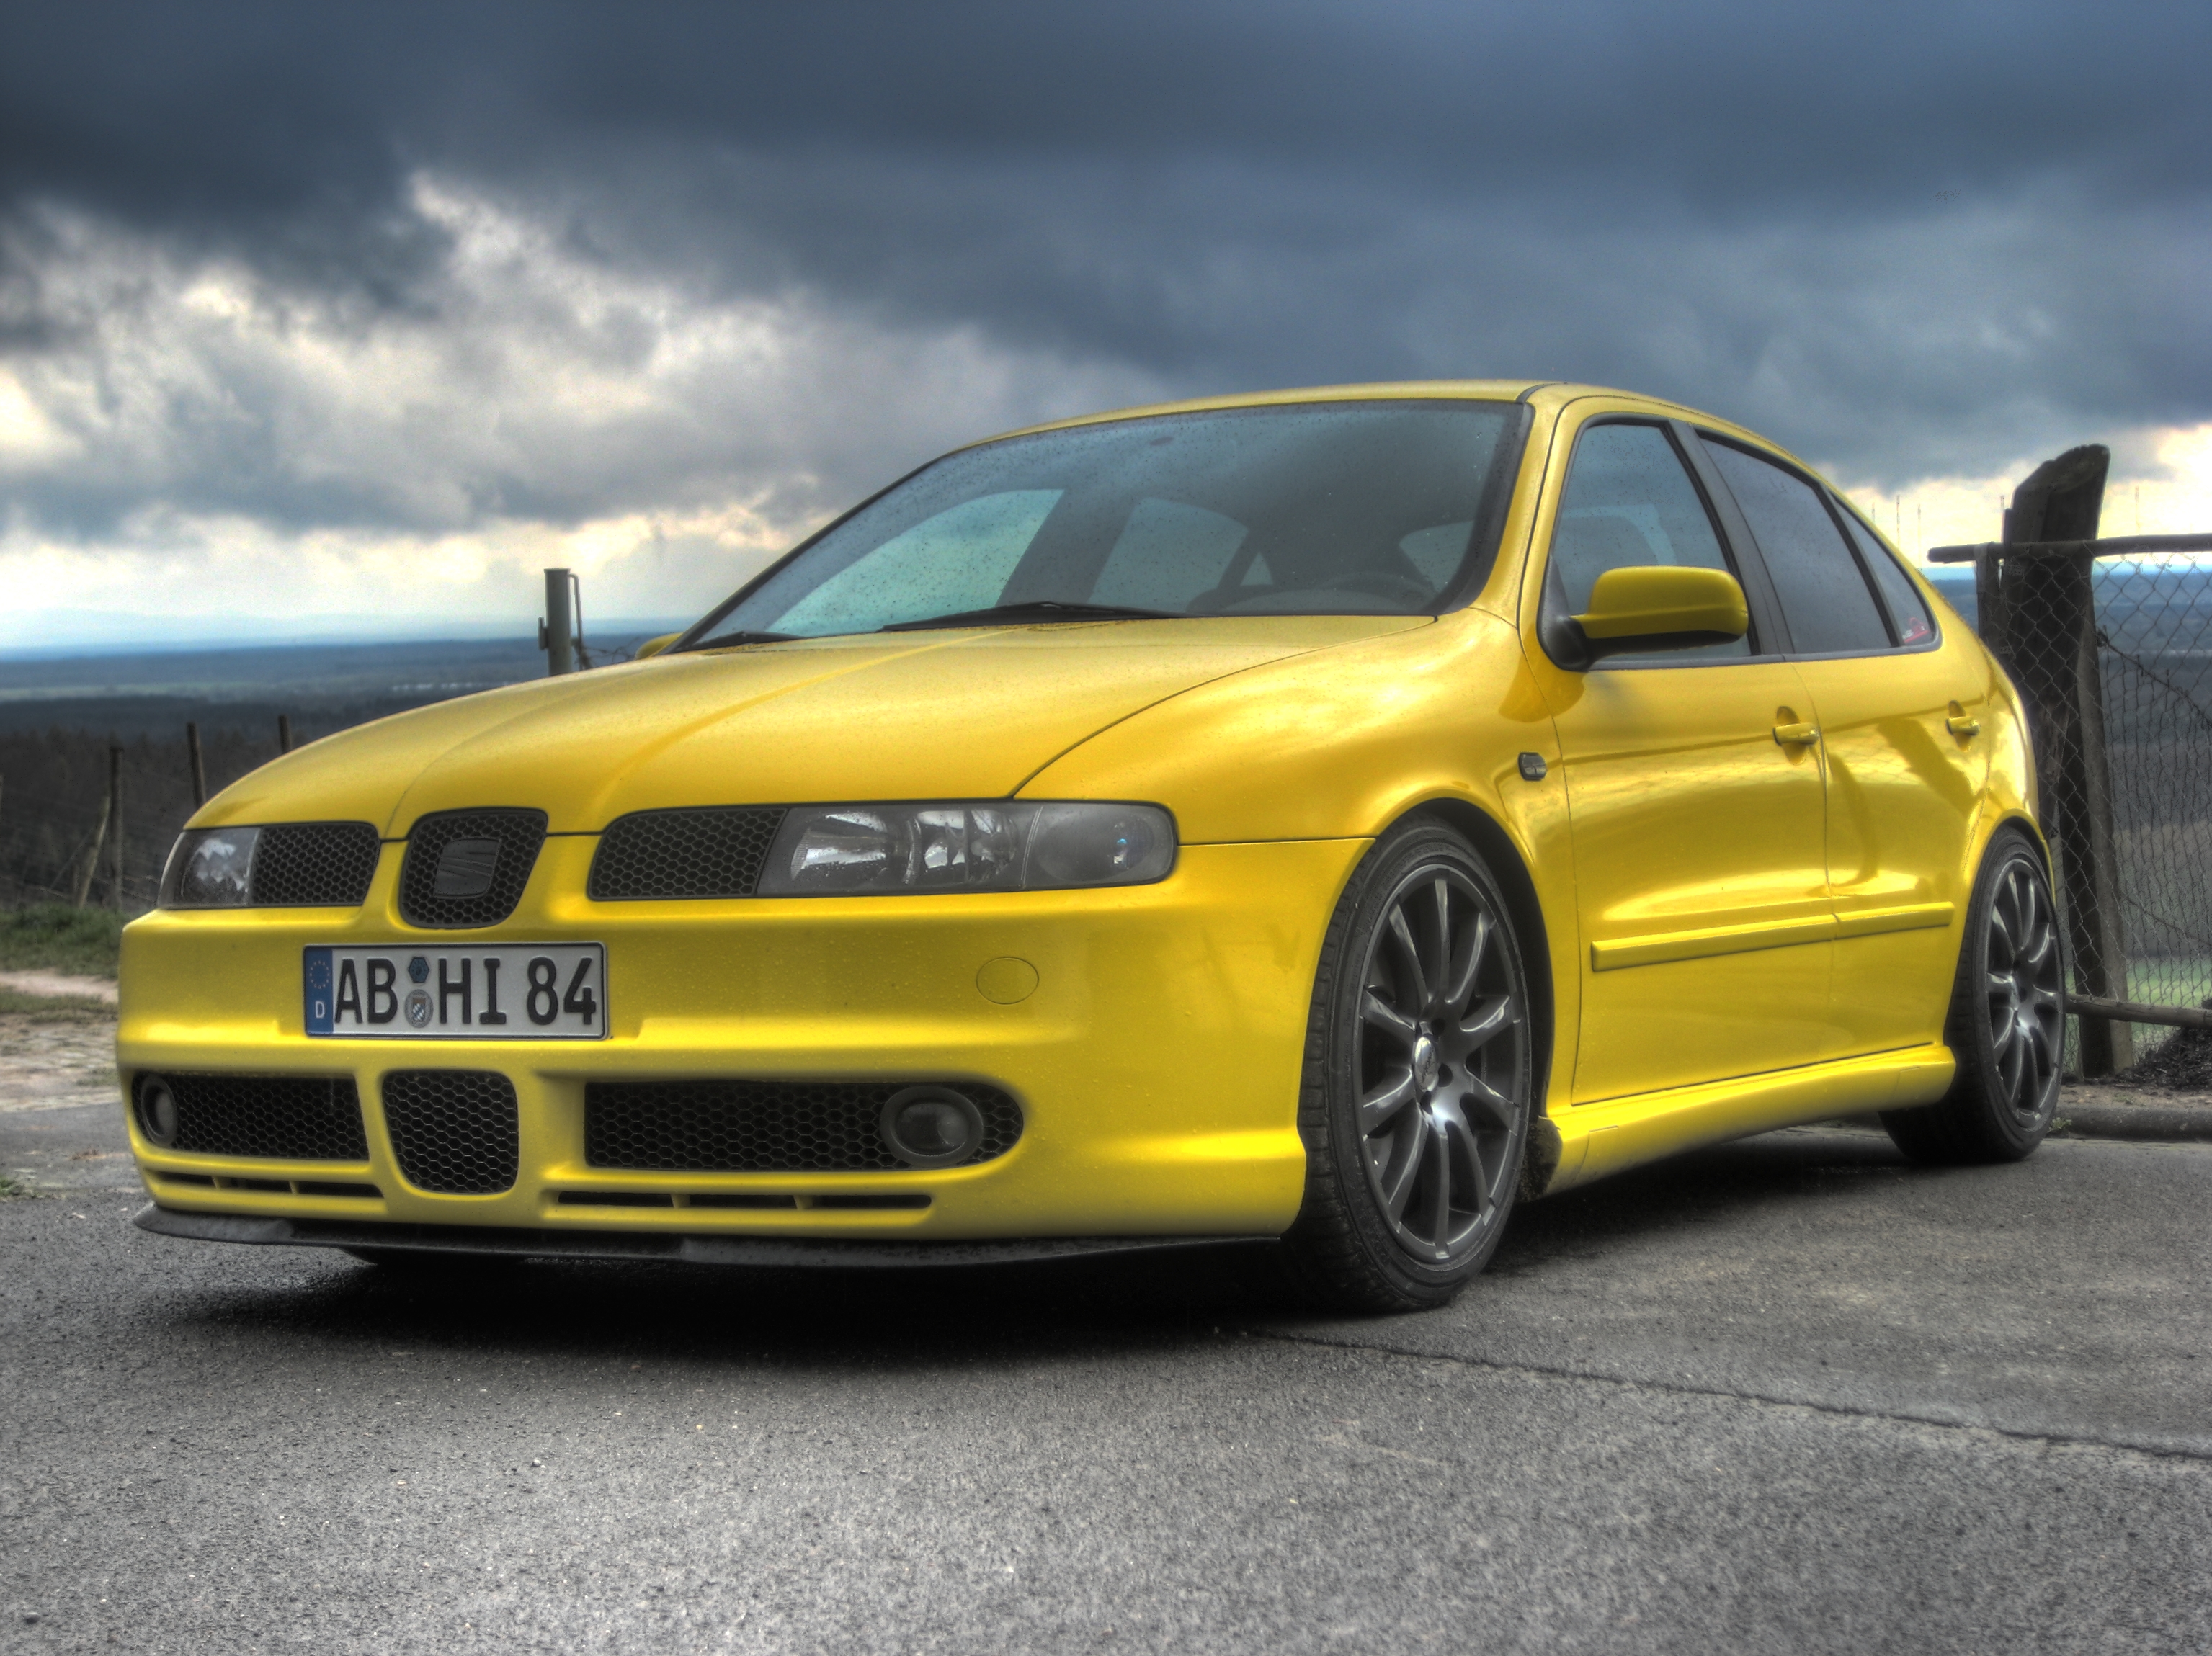 Seat Leon Yellow 1M HDR Front by snakebite84 on DeviantArt